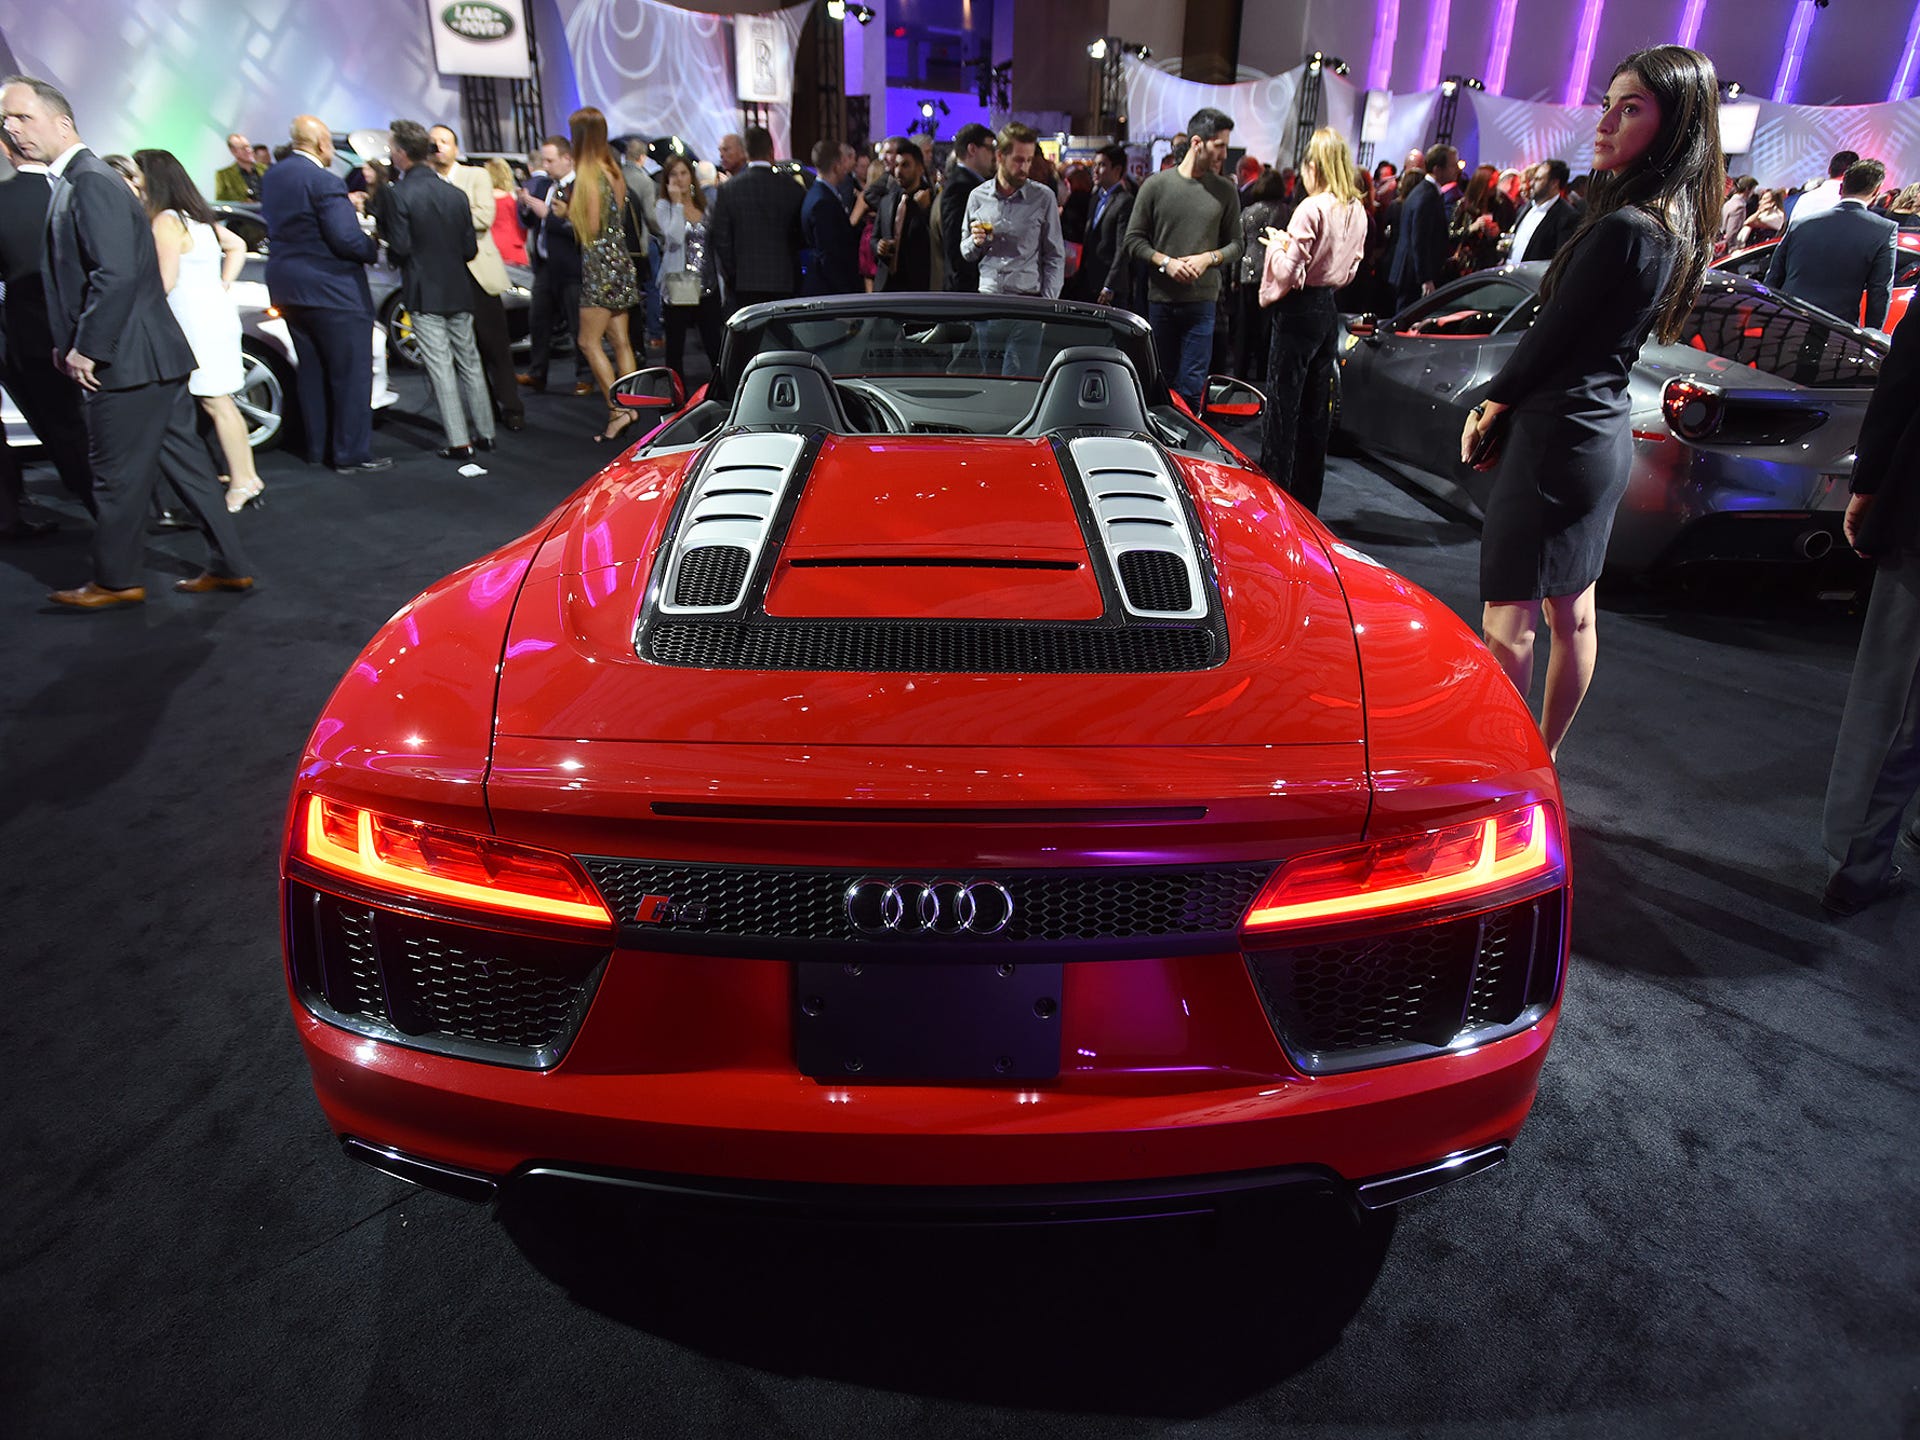 Exotic cars star at exclusive auto show event